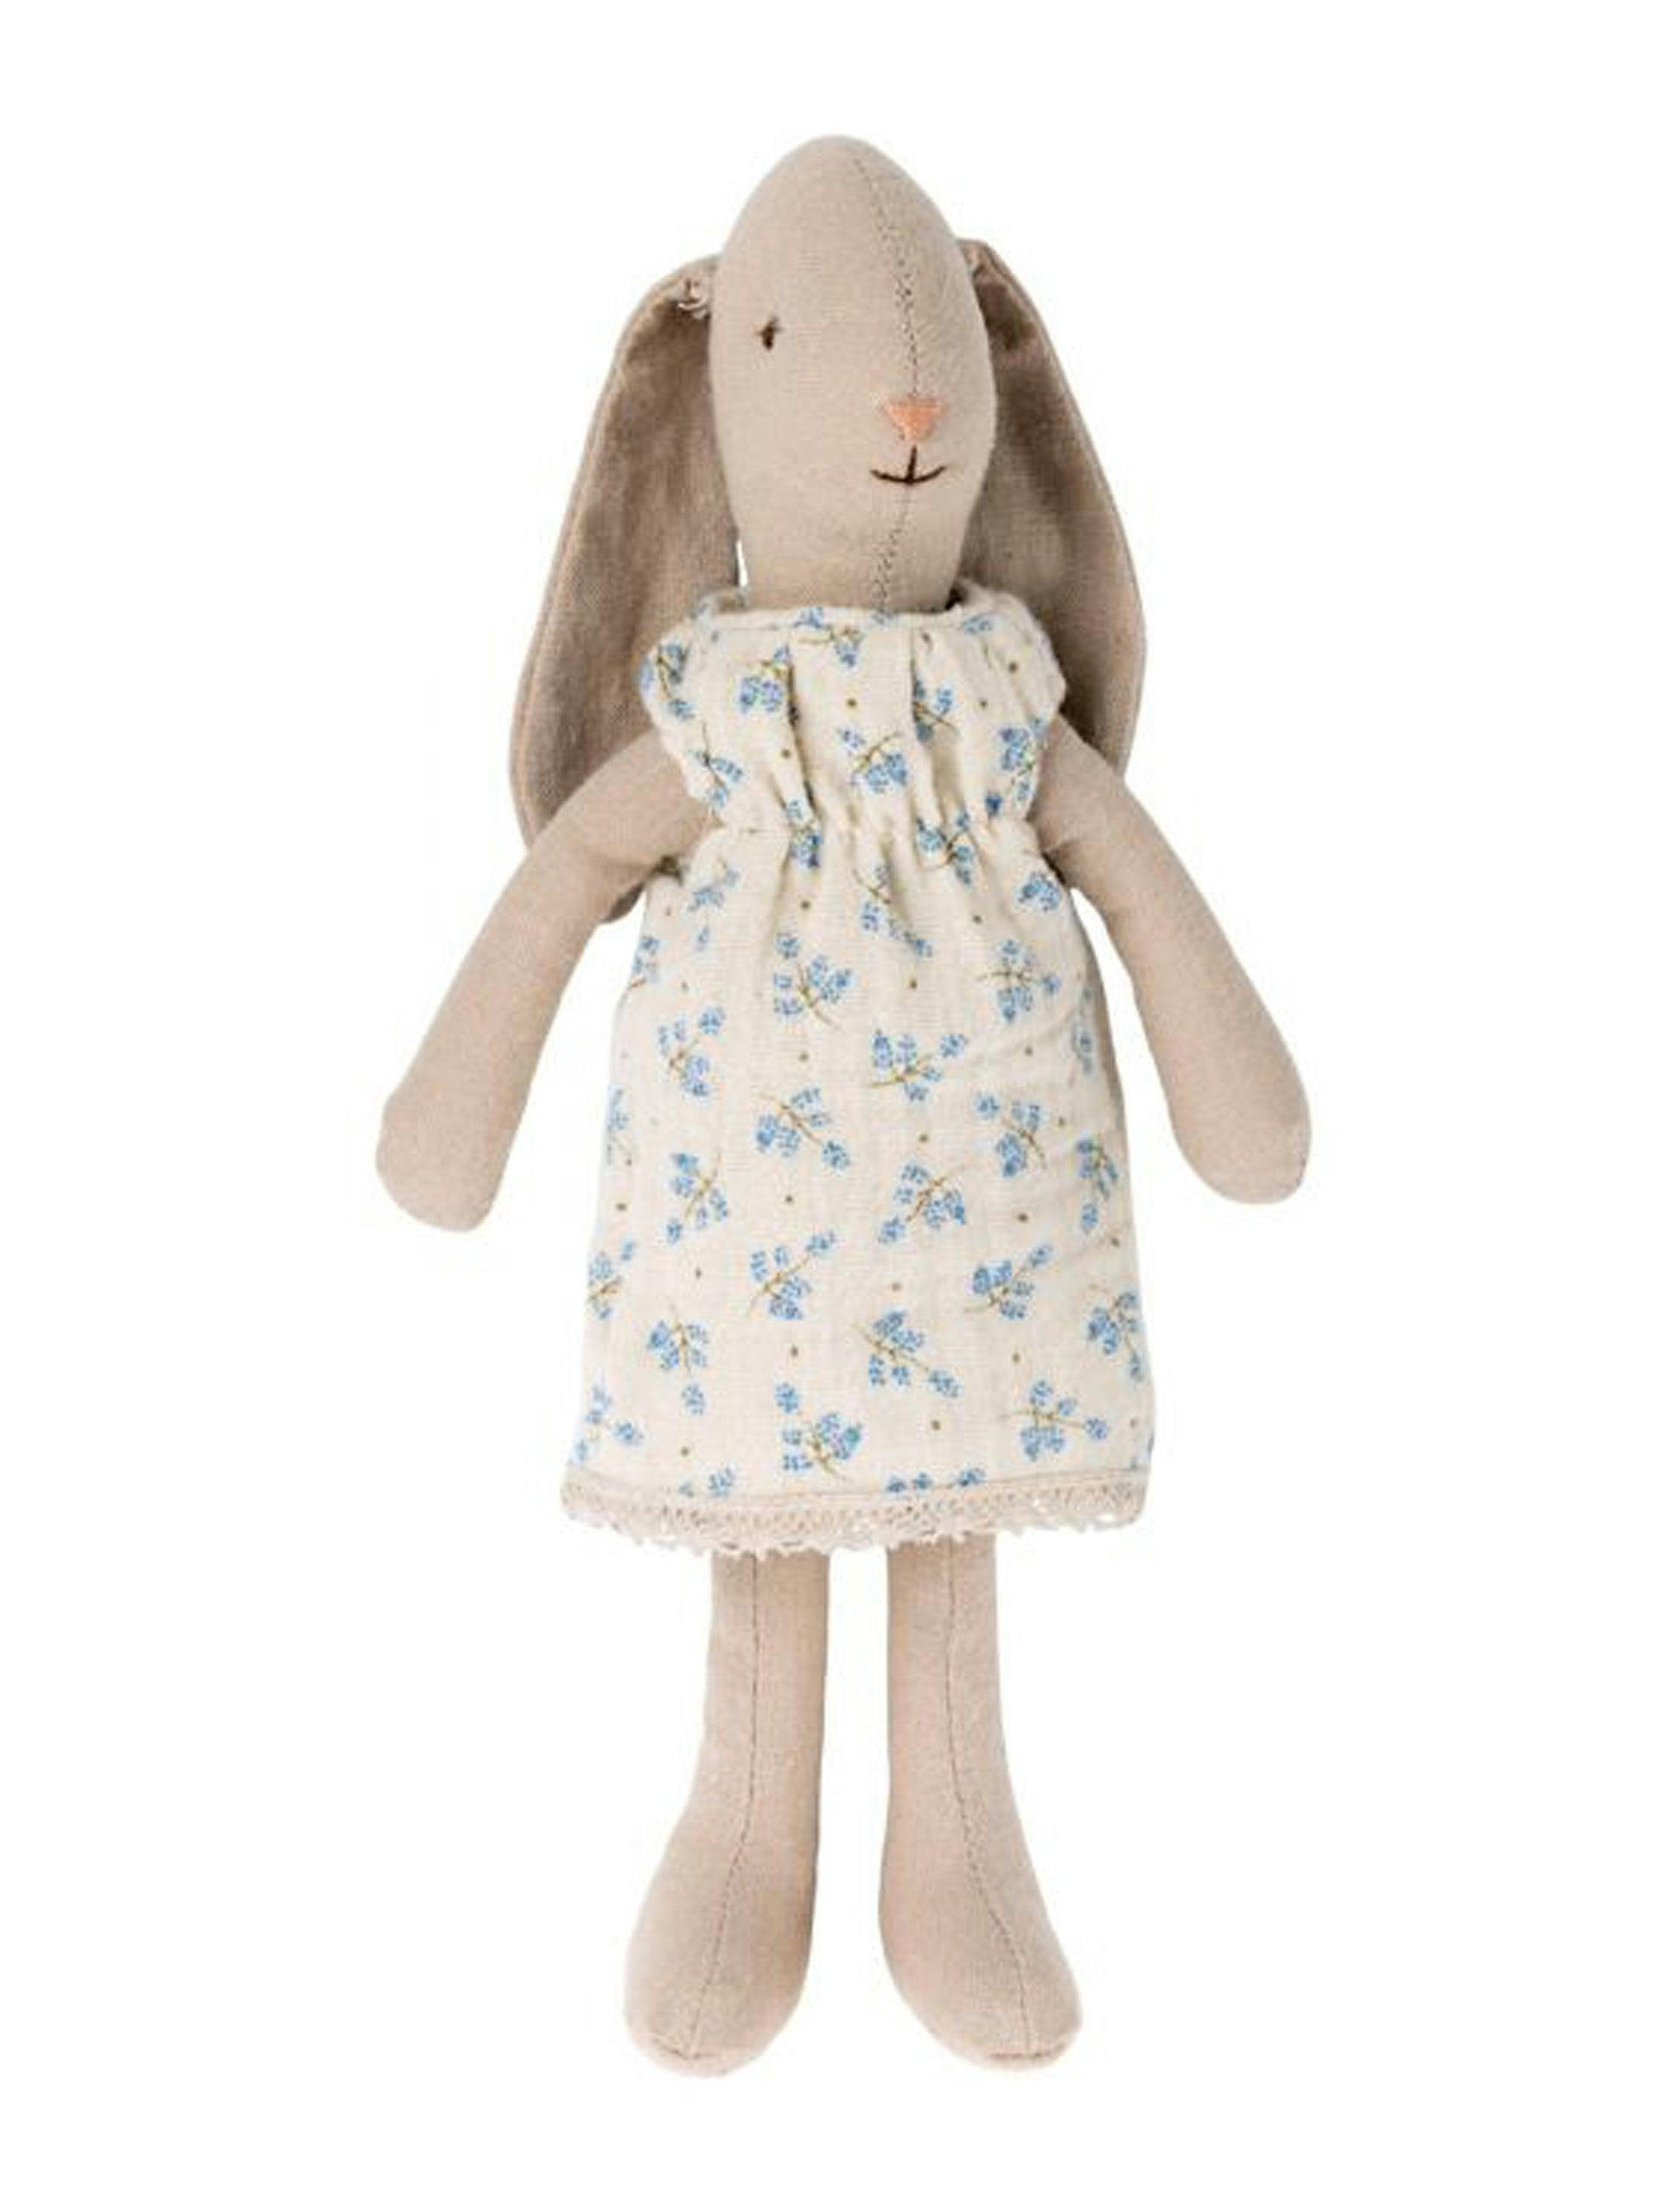 Soft toy bunny in a dress